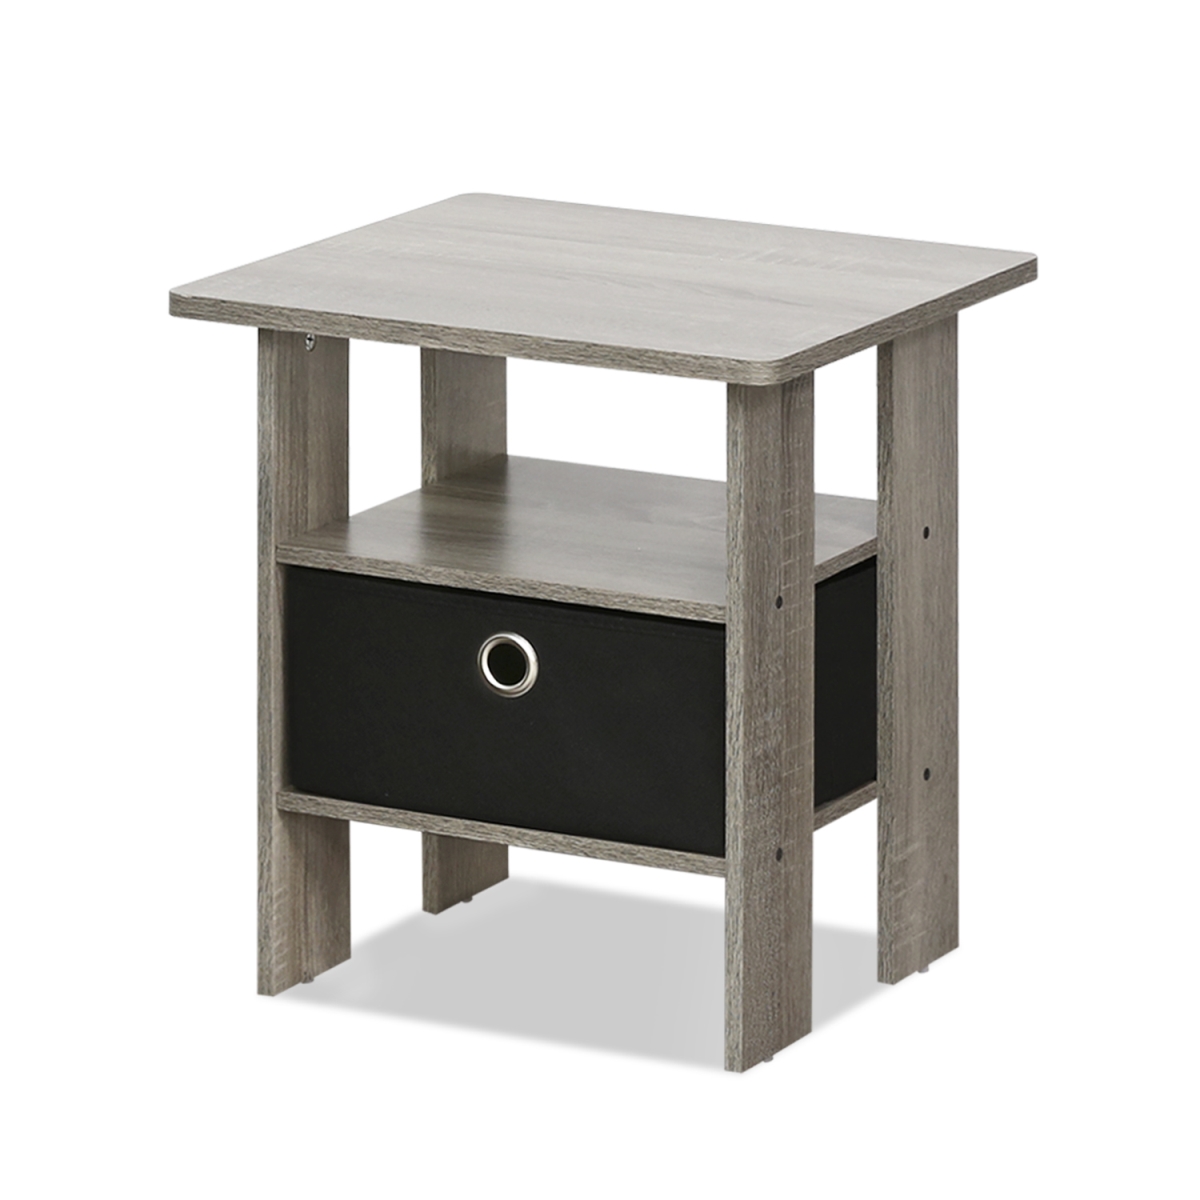 11157GYW-BK End Table Bedroom Night Stand with Bin Drawer, French Oak Grey & Black